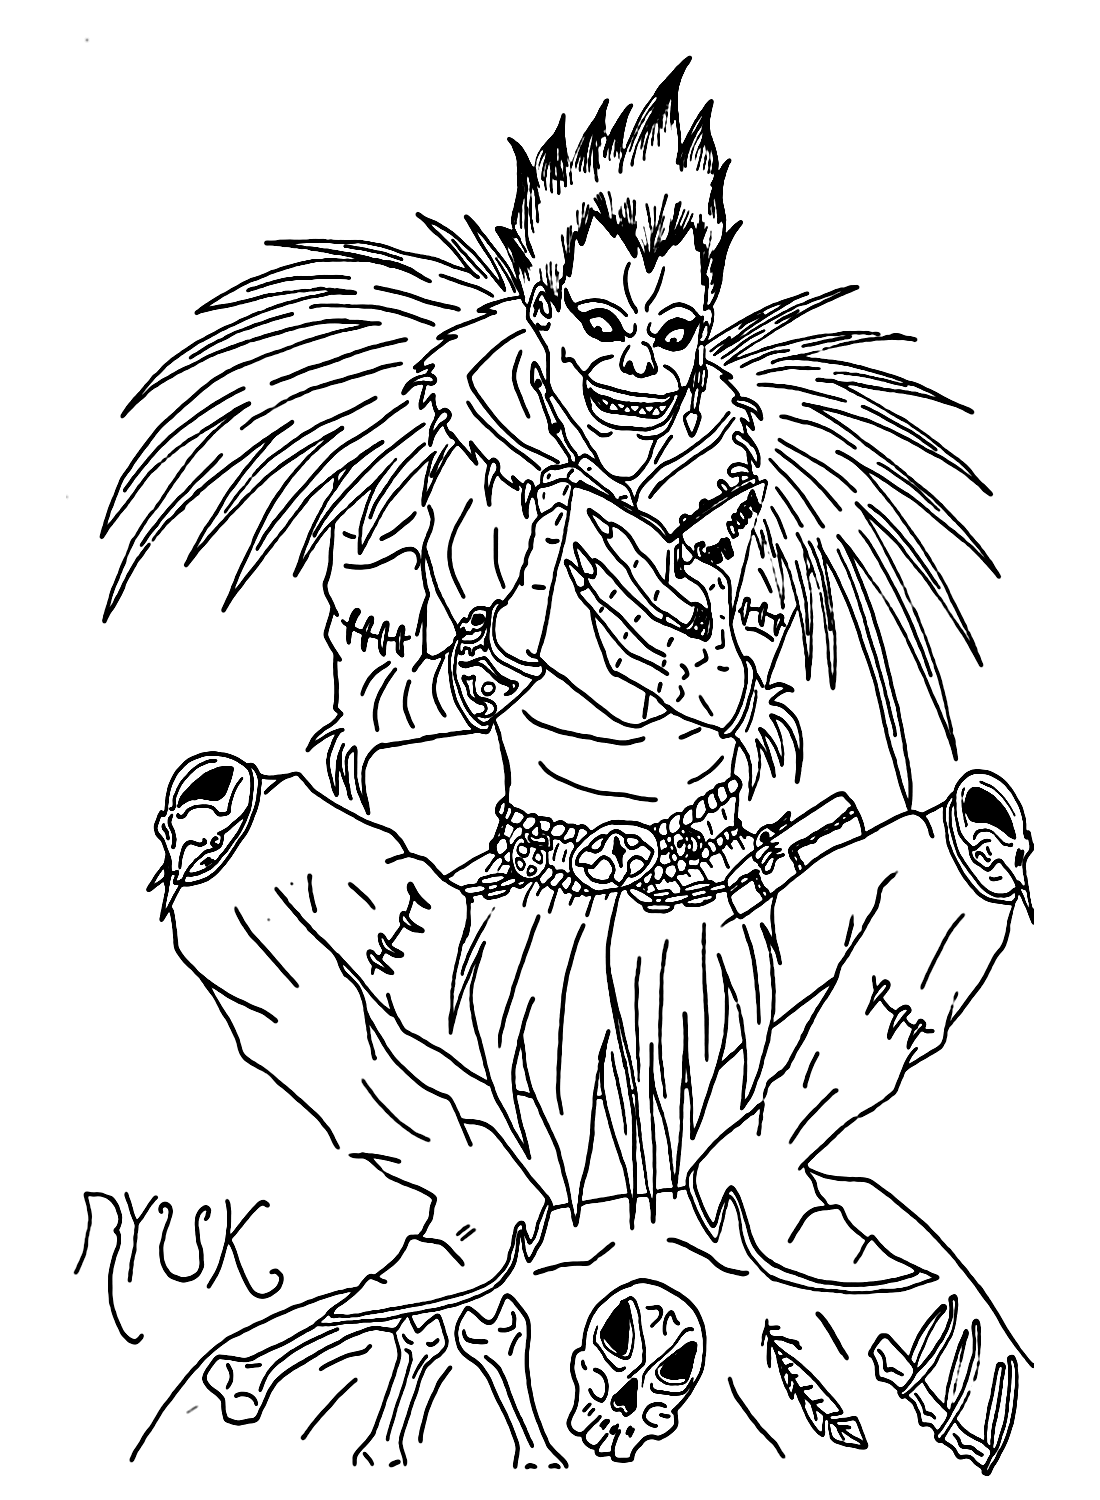 Ryuk is reading a notebook Coloring Page - Free Printable Coloring Pages